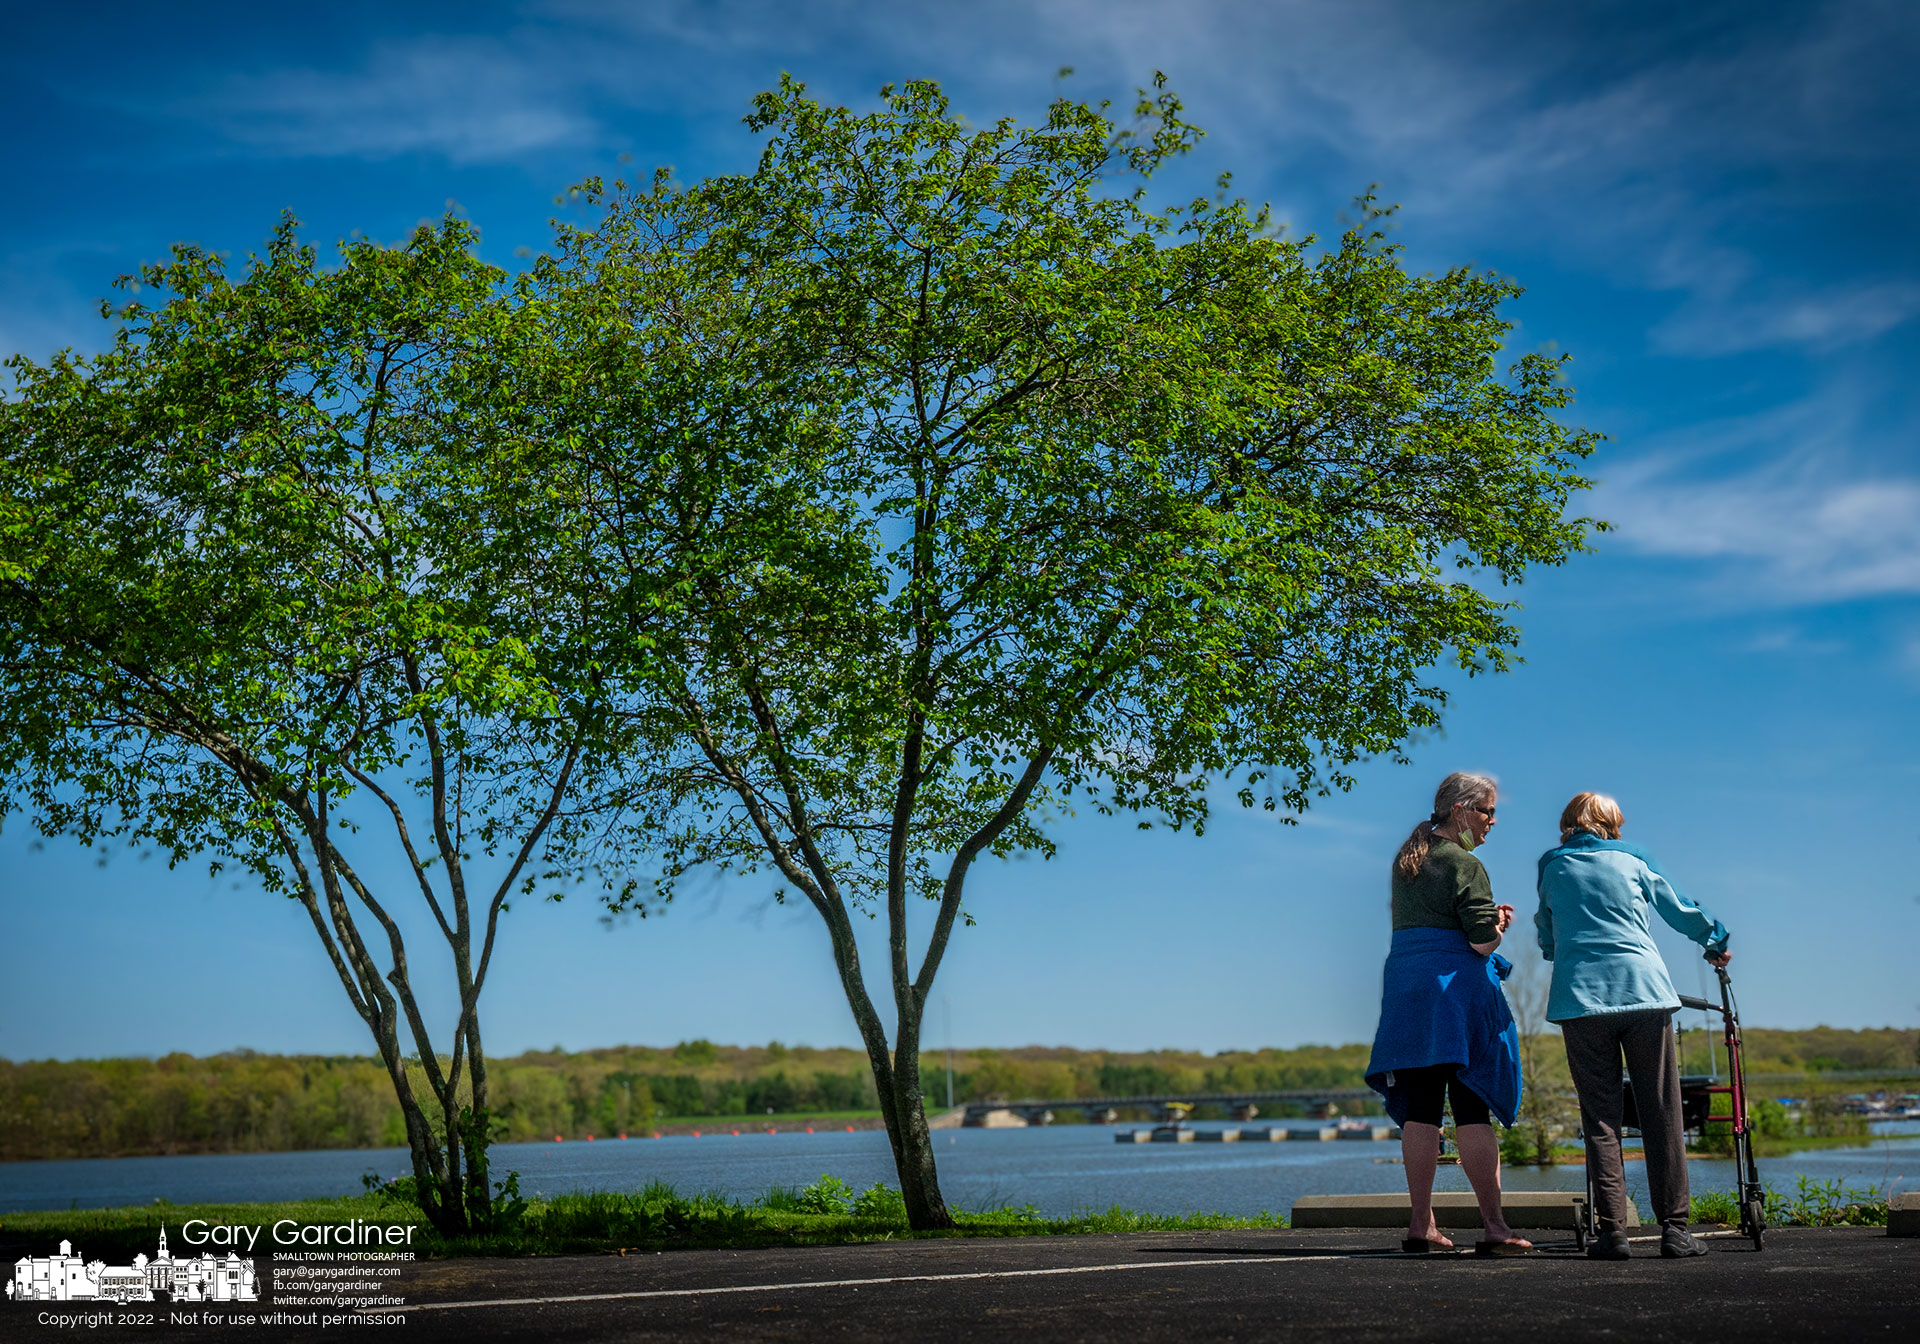 Belle, right, a 95-year-old mother, walks with her daughter to the edge of a parking lot overlooking Hoover Reservoir and the dam as they spend time together outside on Mother's Day. My Final Photo for May 8, 2022.